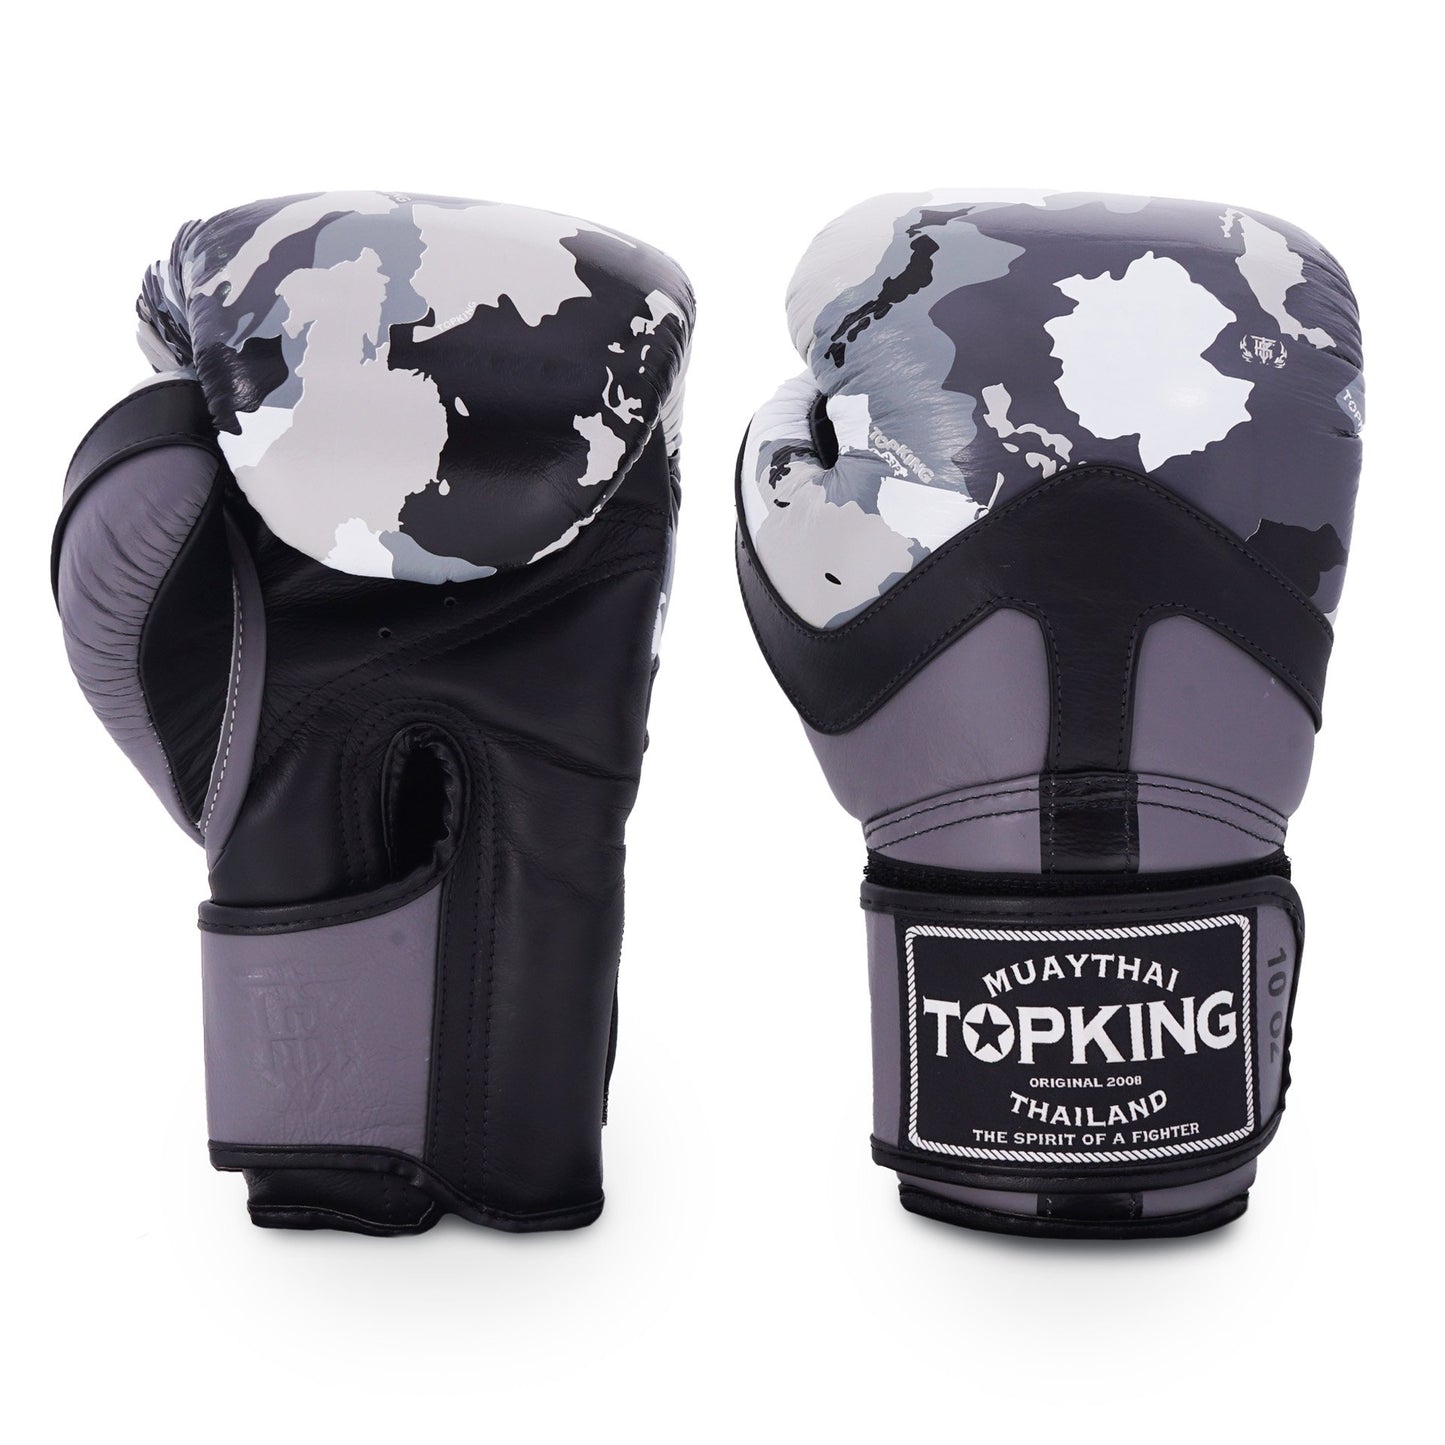 TKB GLOVES CAMOUFLAGE LEATHER HOOK-AND-LOOP